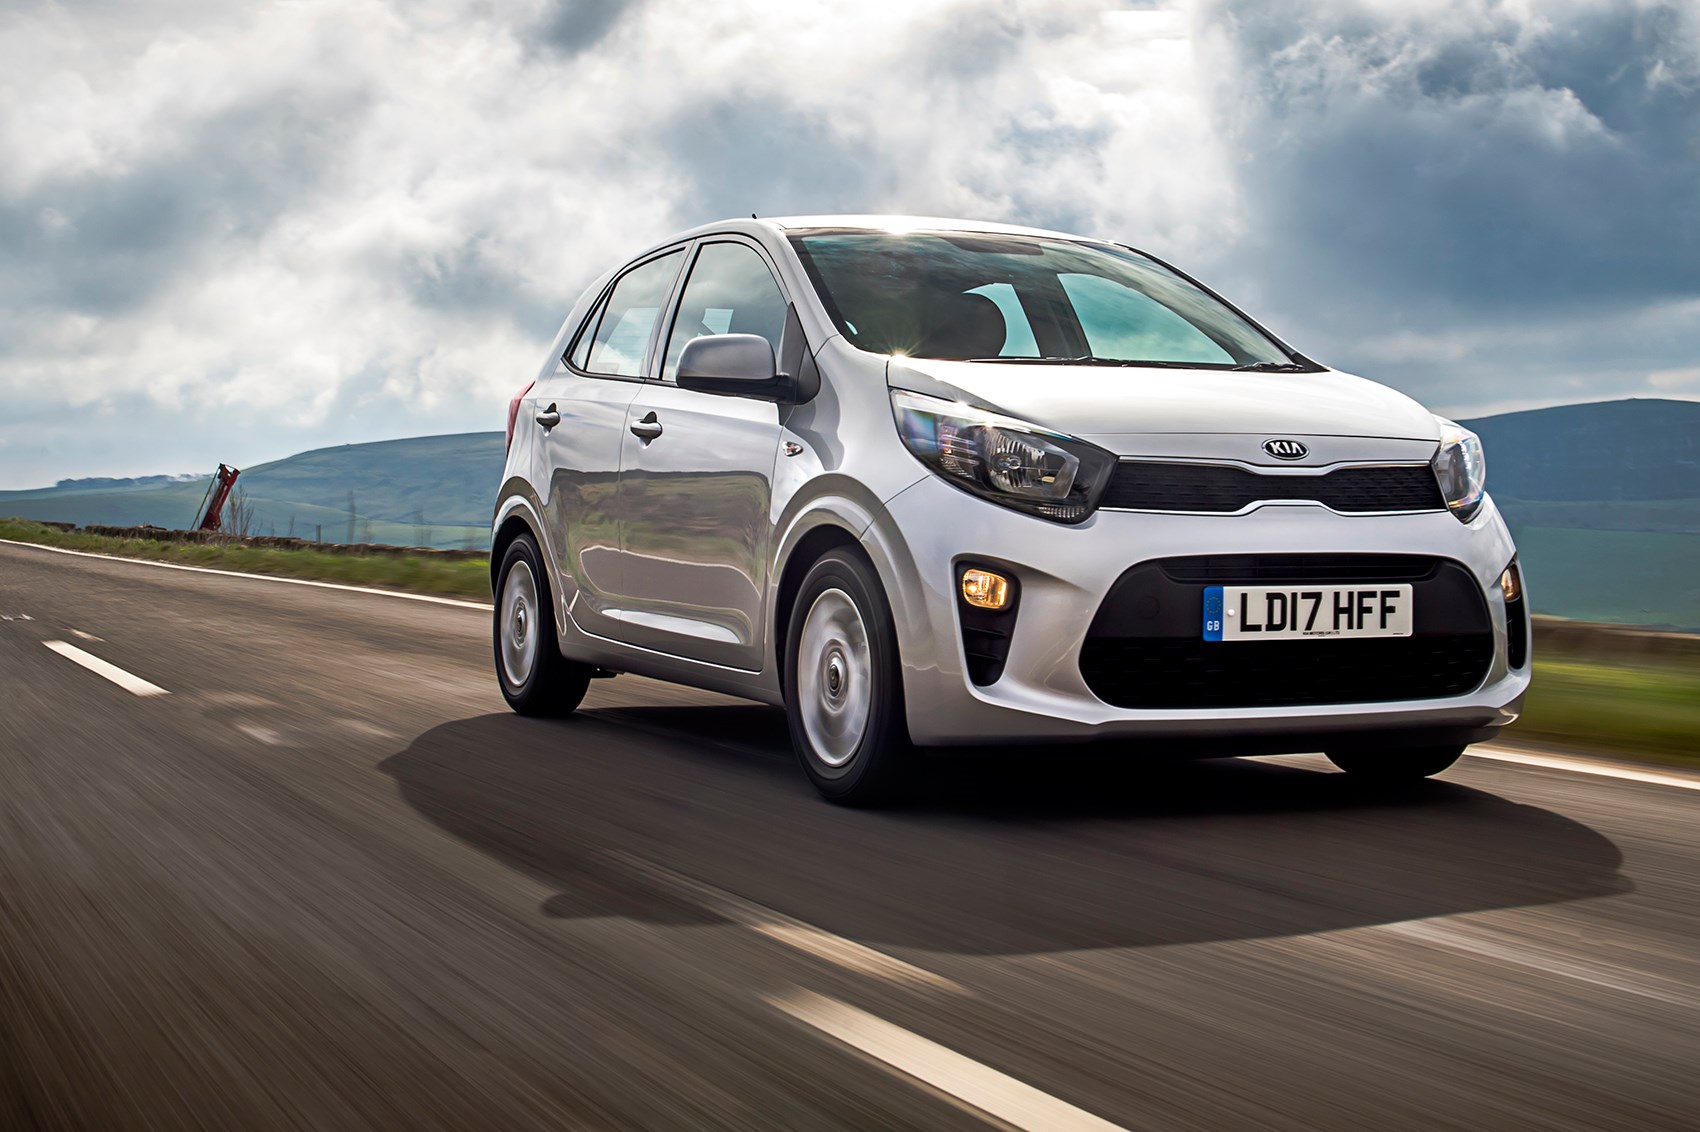 Kia Picanto new car review, UK price, picture gallery